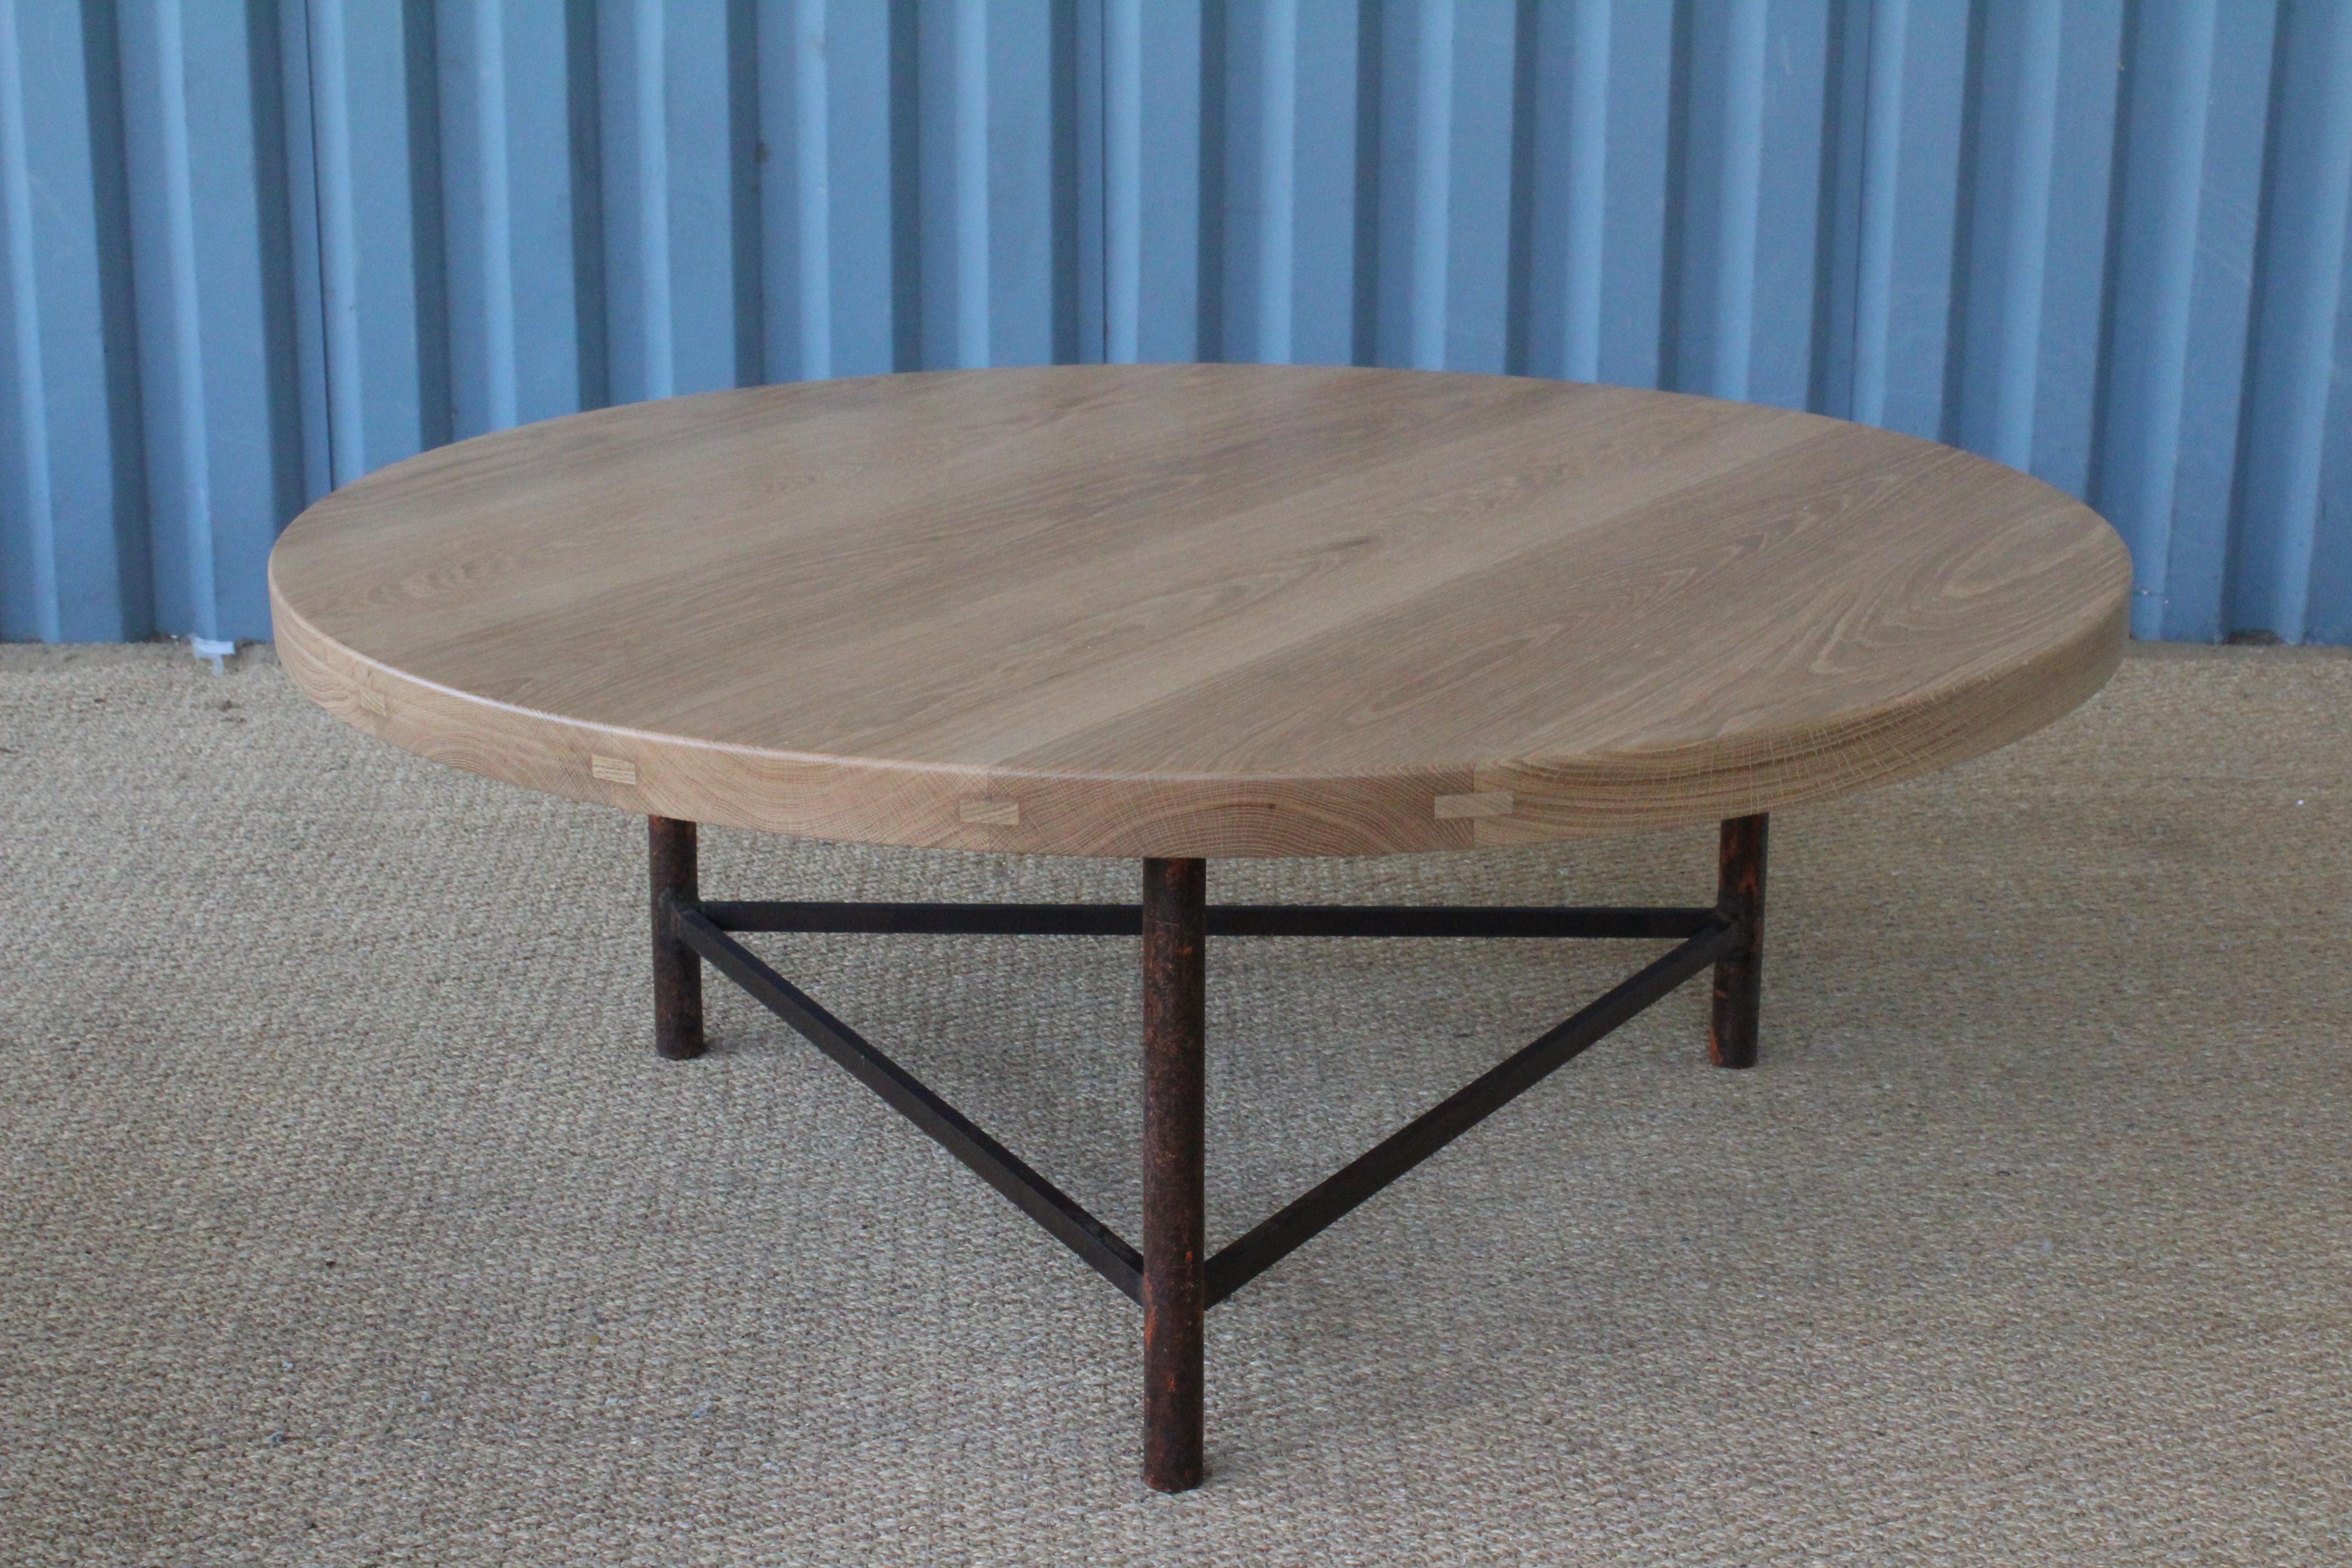 Custom solid white oak coffee table fitted onto a vintage iron base. Oak top has a natural finish while the iron base has plenty of patina.